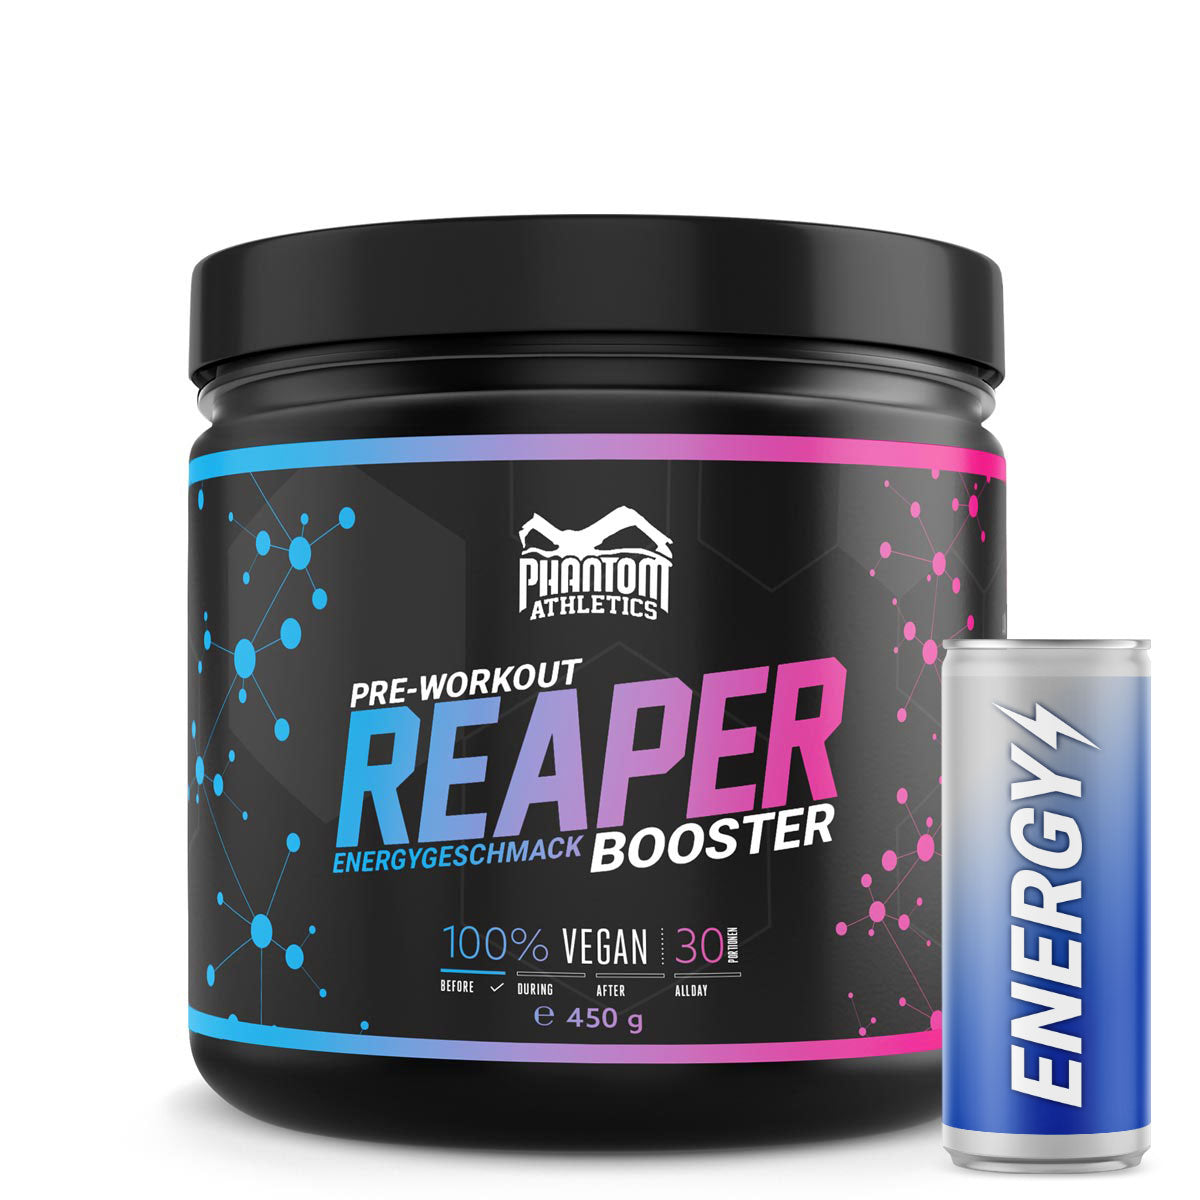 Booster reaper - energy